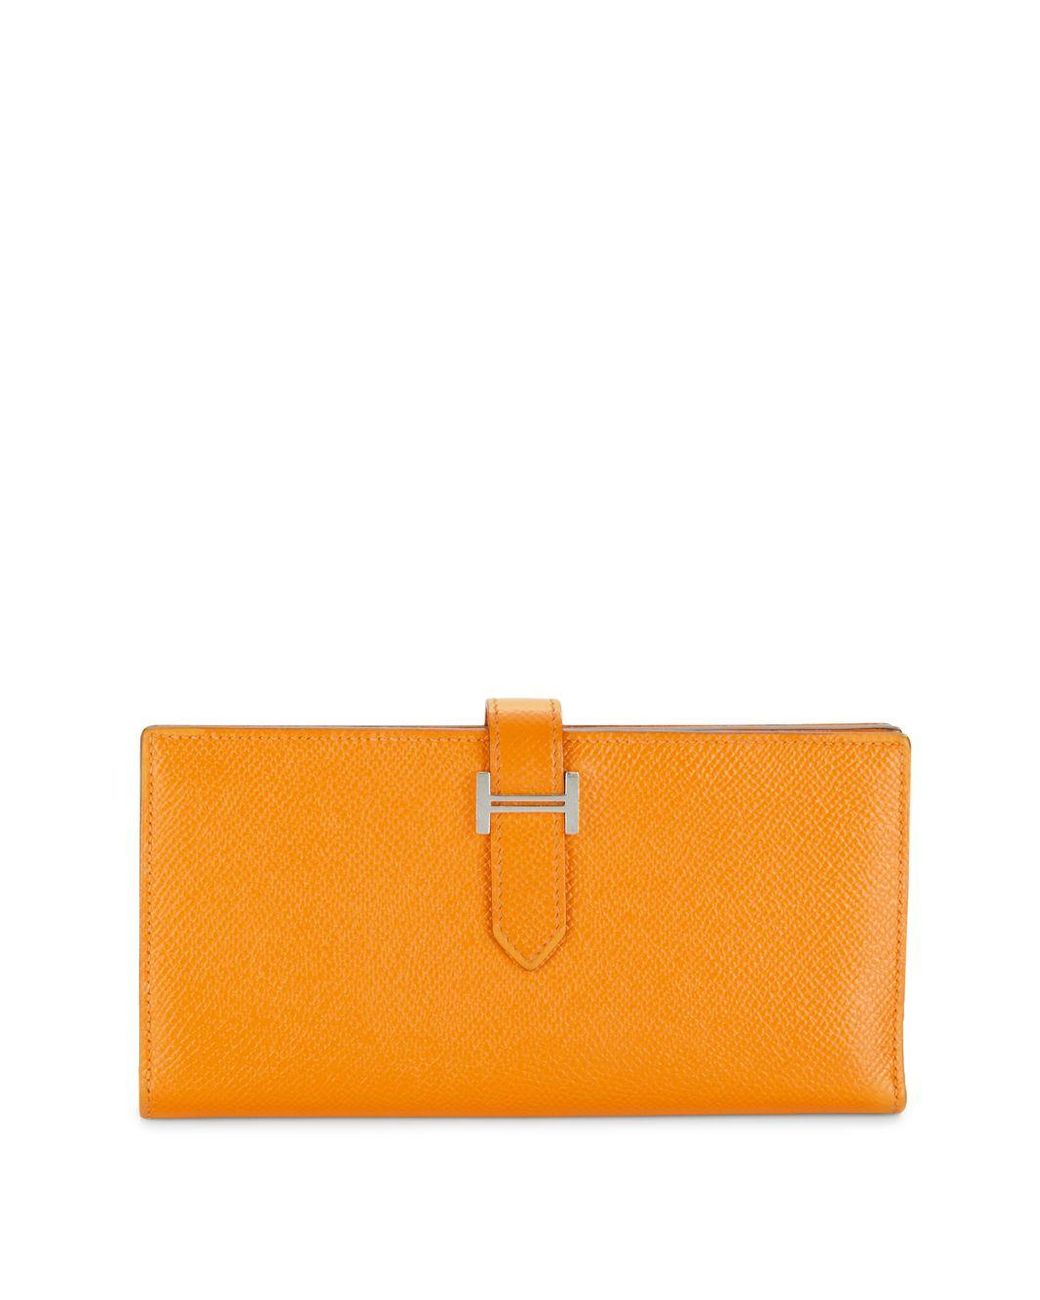 SOLD!!! Authentic Vintage Hermes Bearn Long Wallet